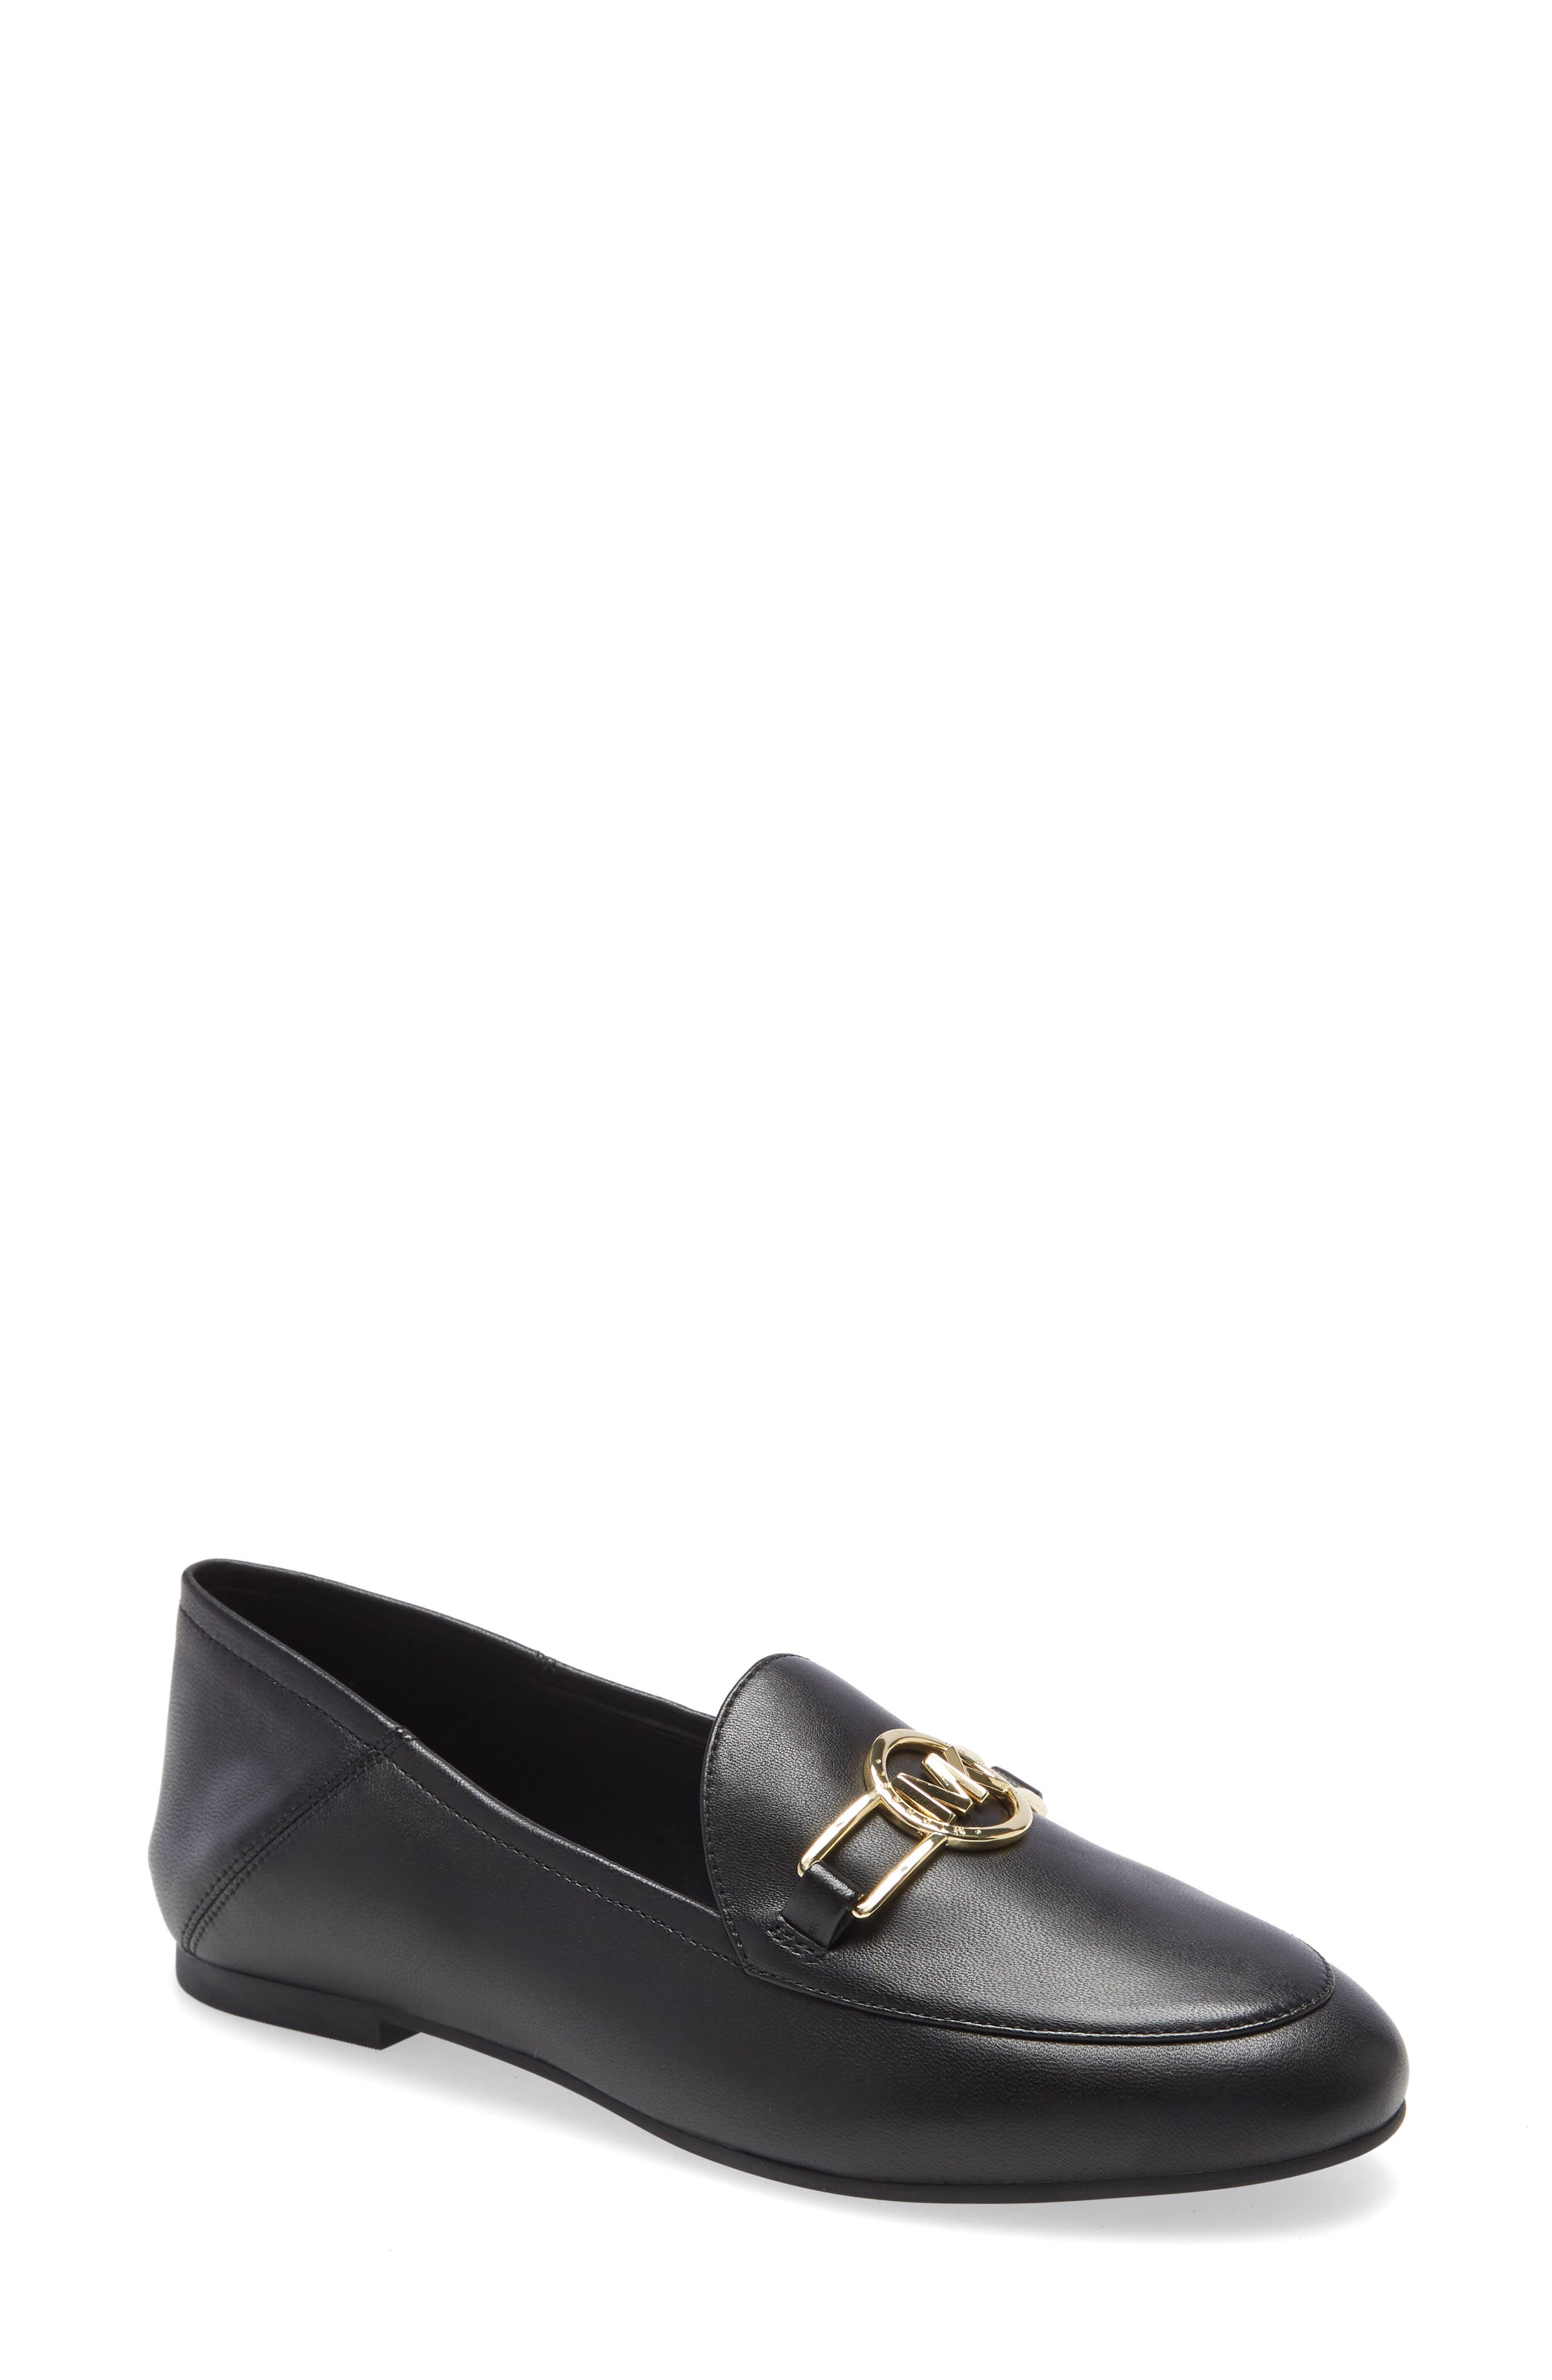 cheap michael kors loafers